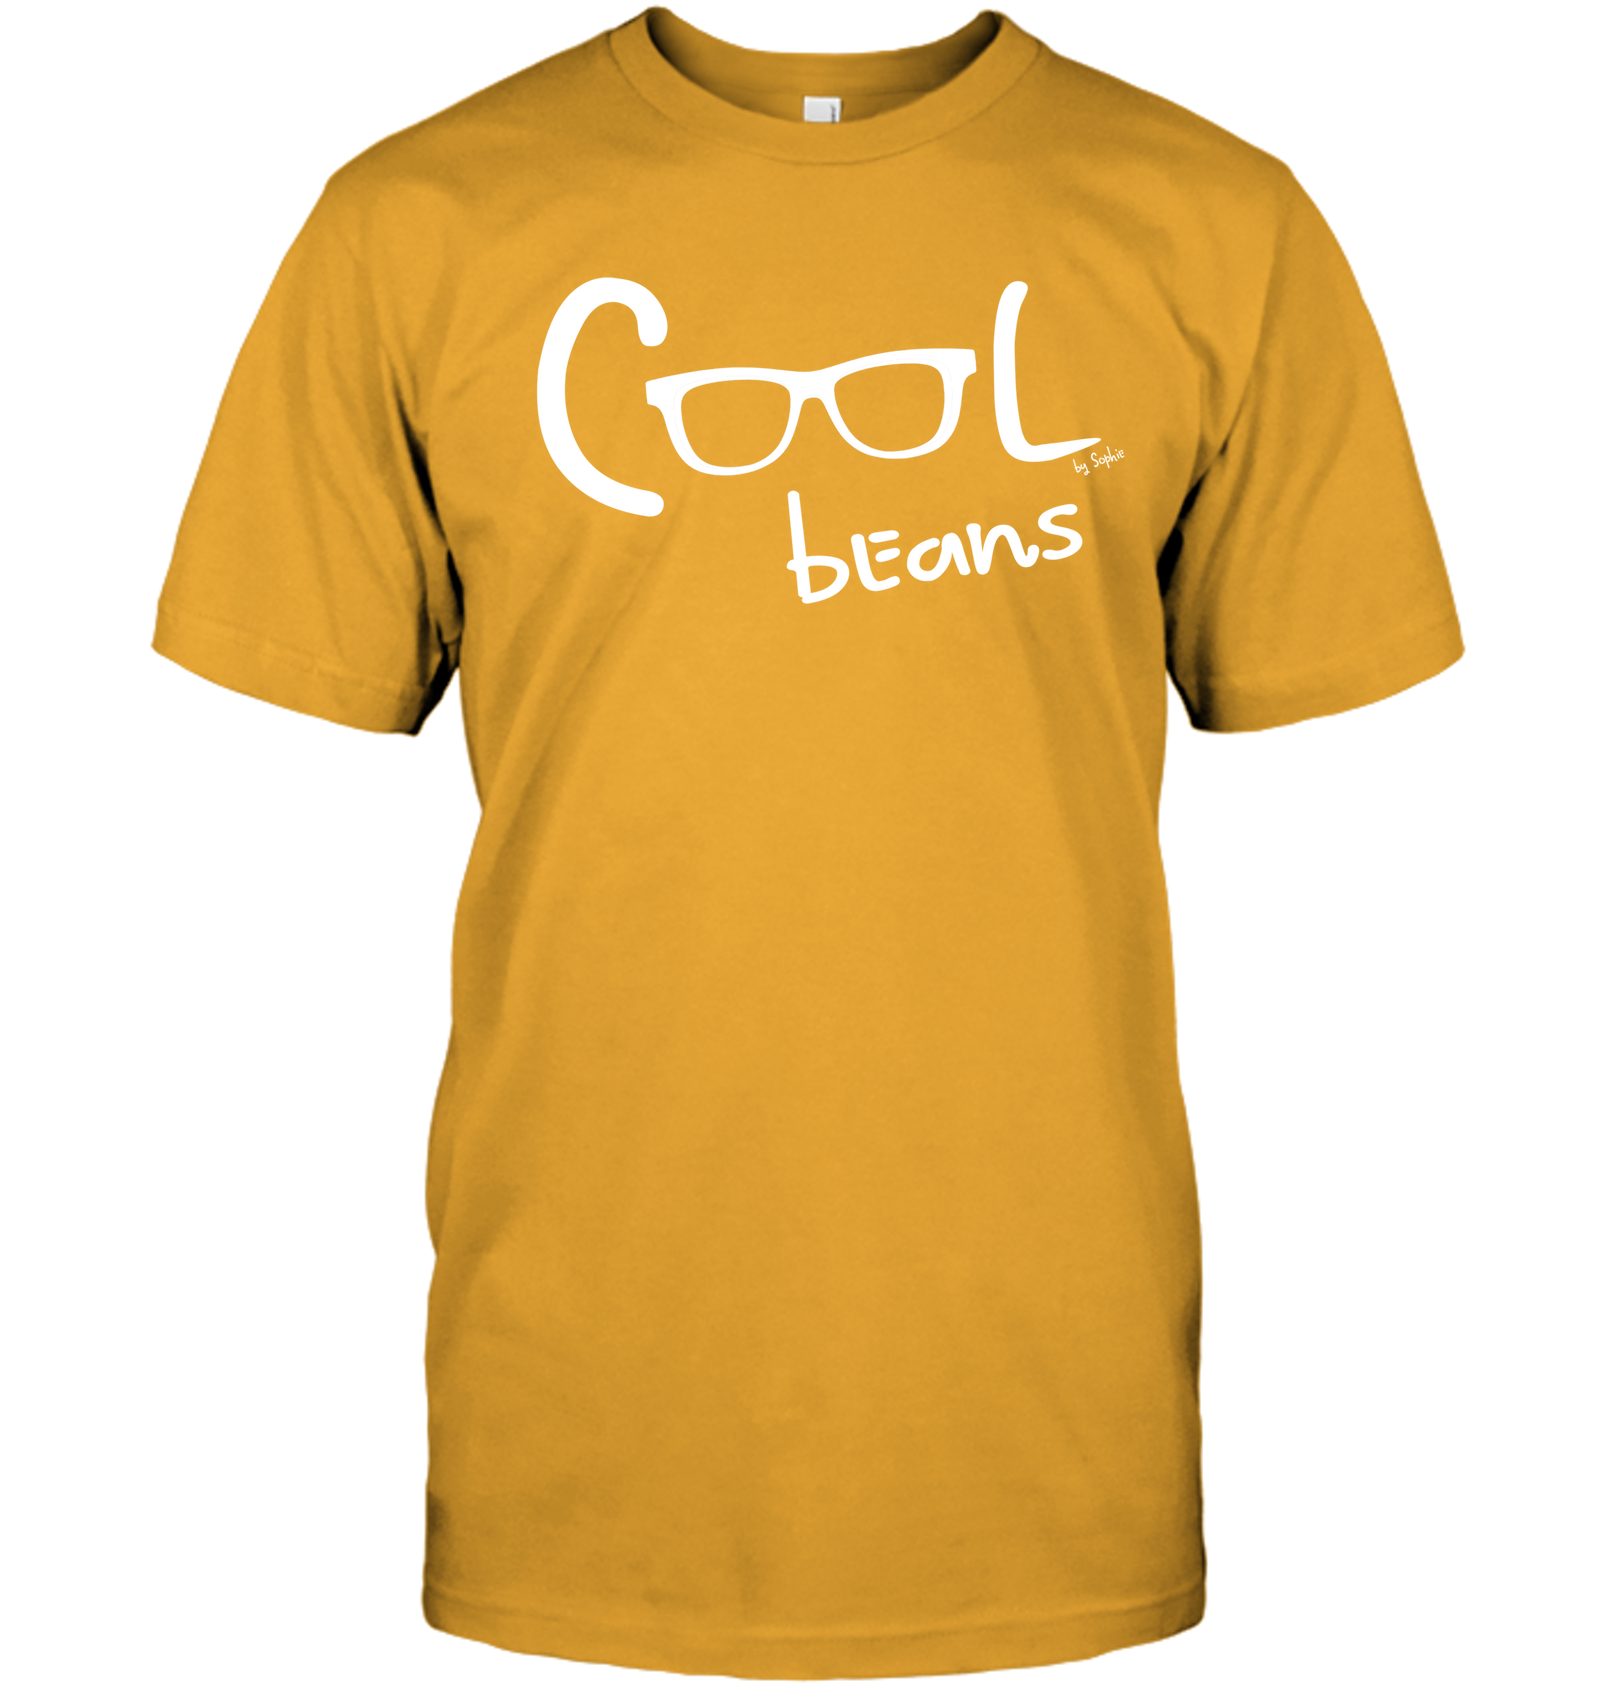 Cool Beans - White - Hanes Adult Tagless® T-Shirt